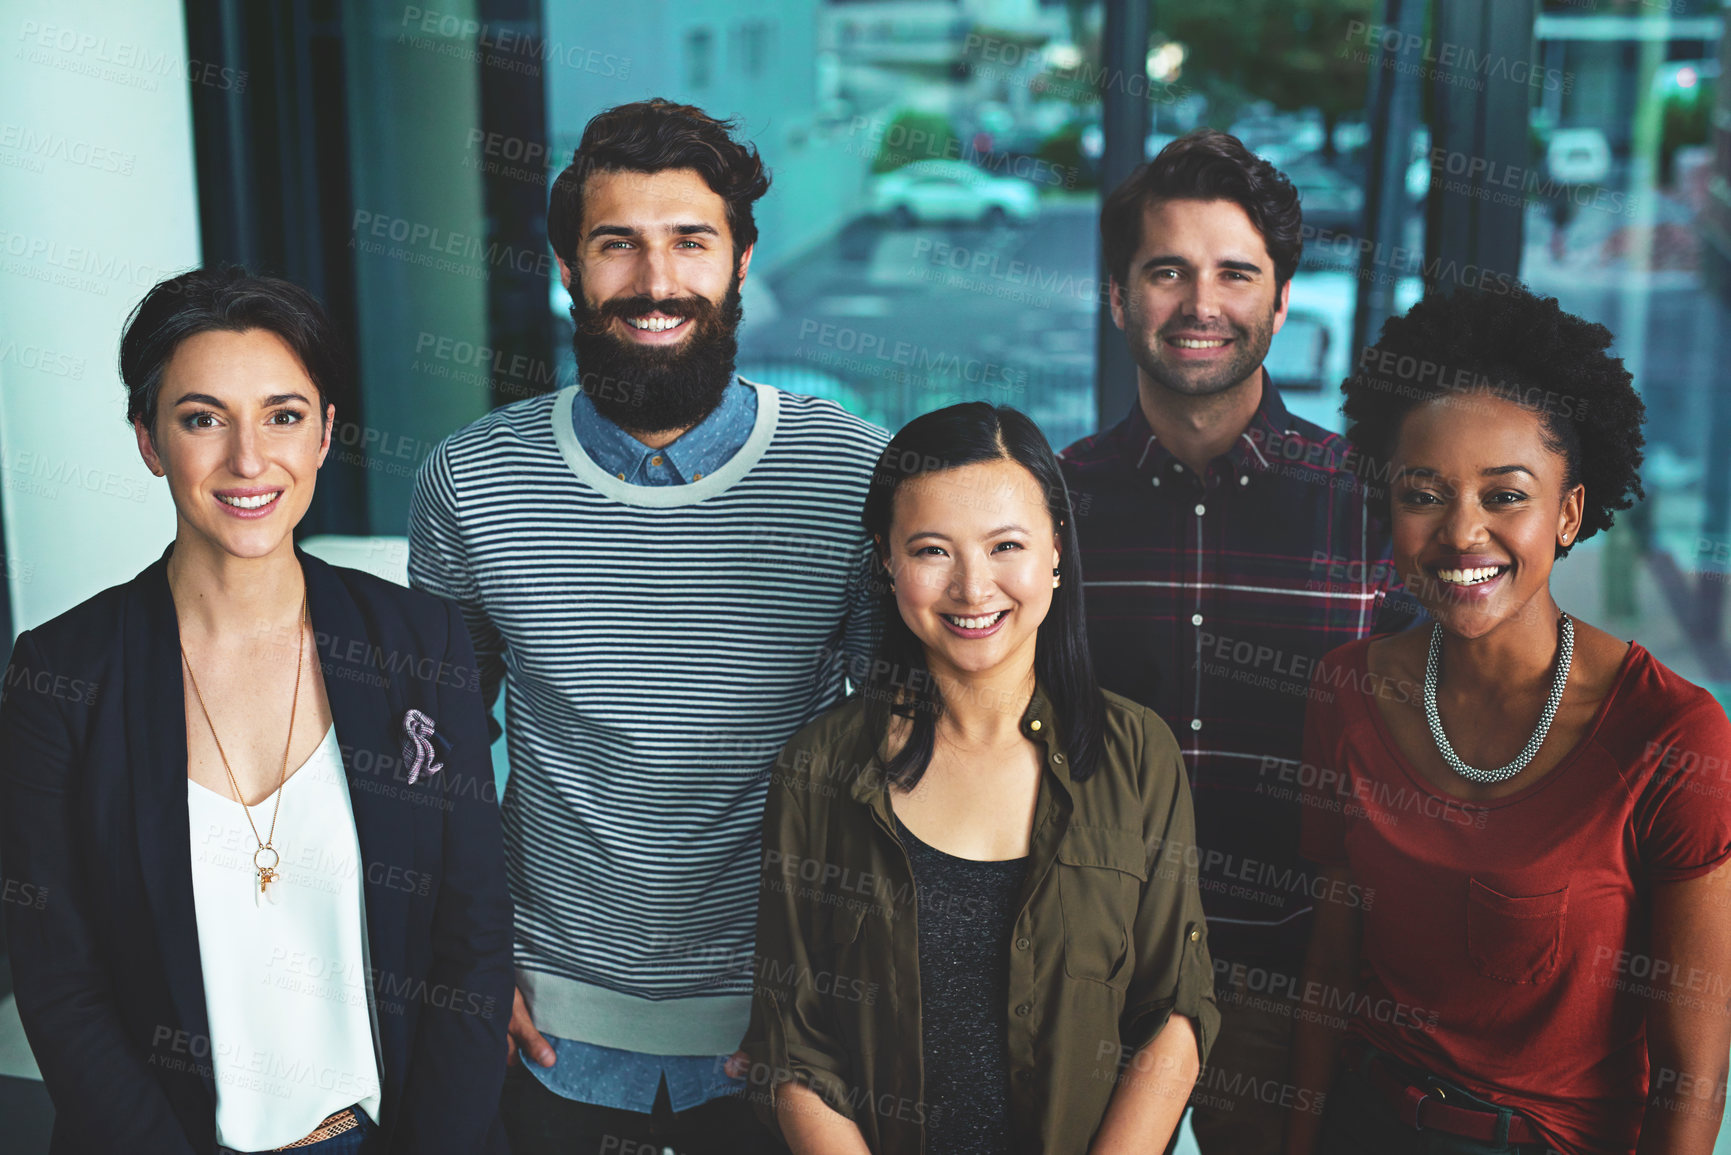 Buy stock photo Portrait of a group of diverse designers standing together in an office